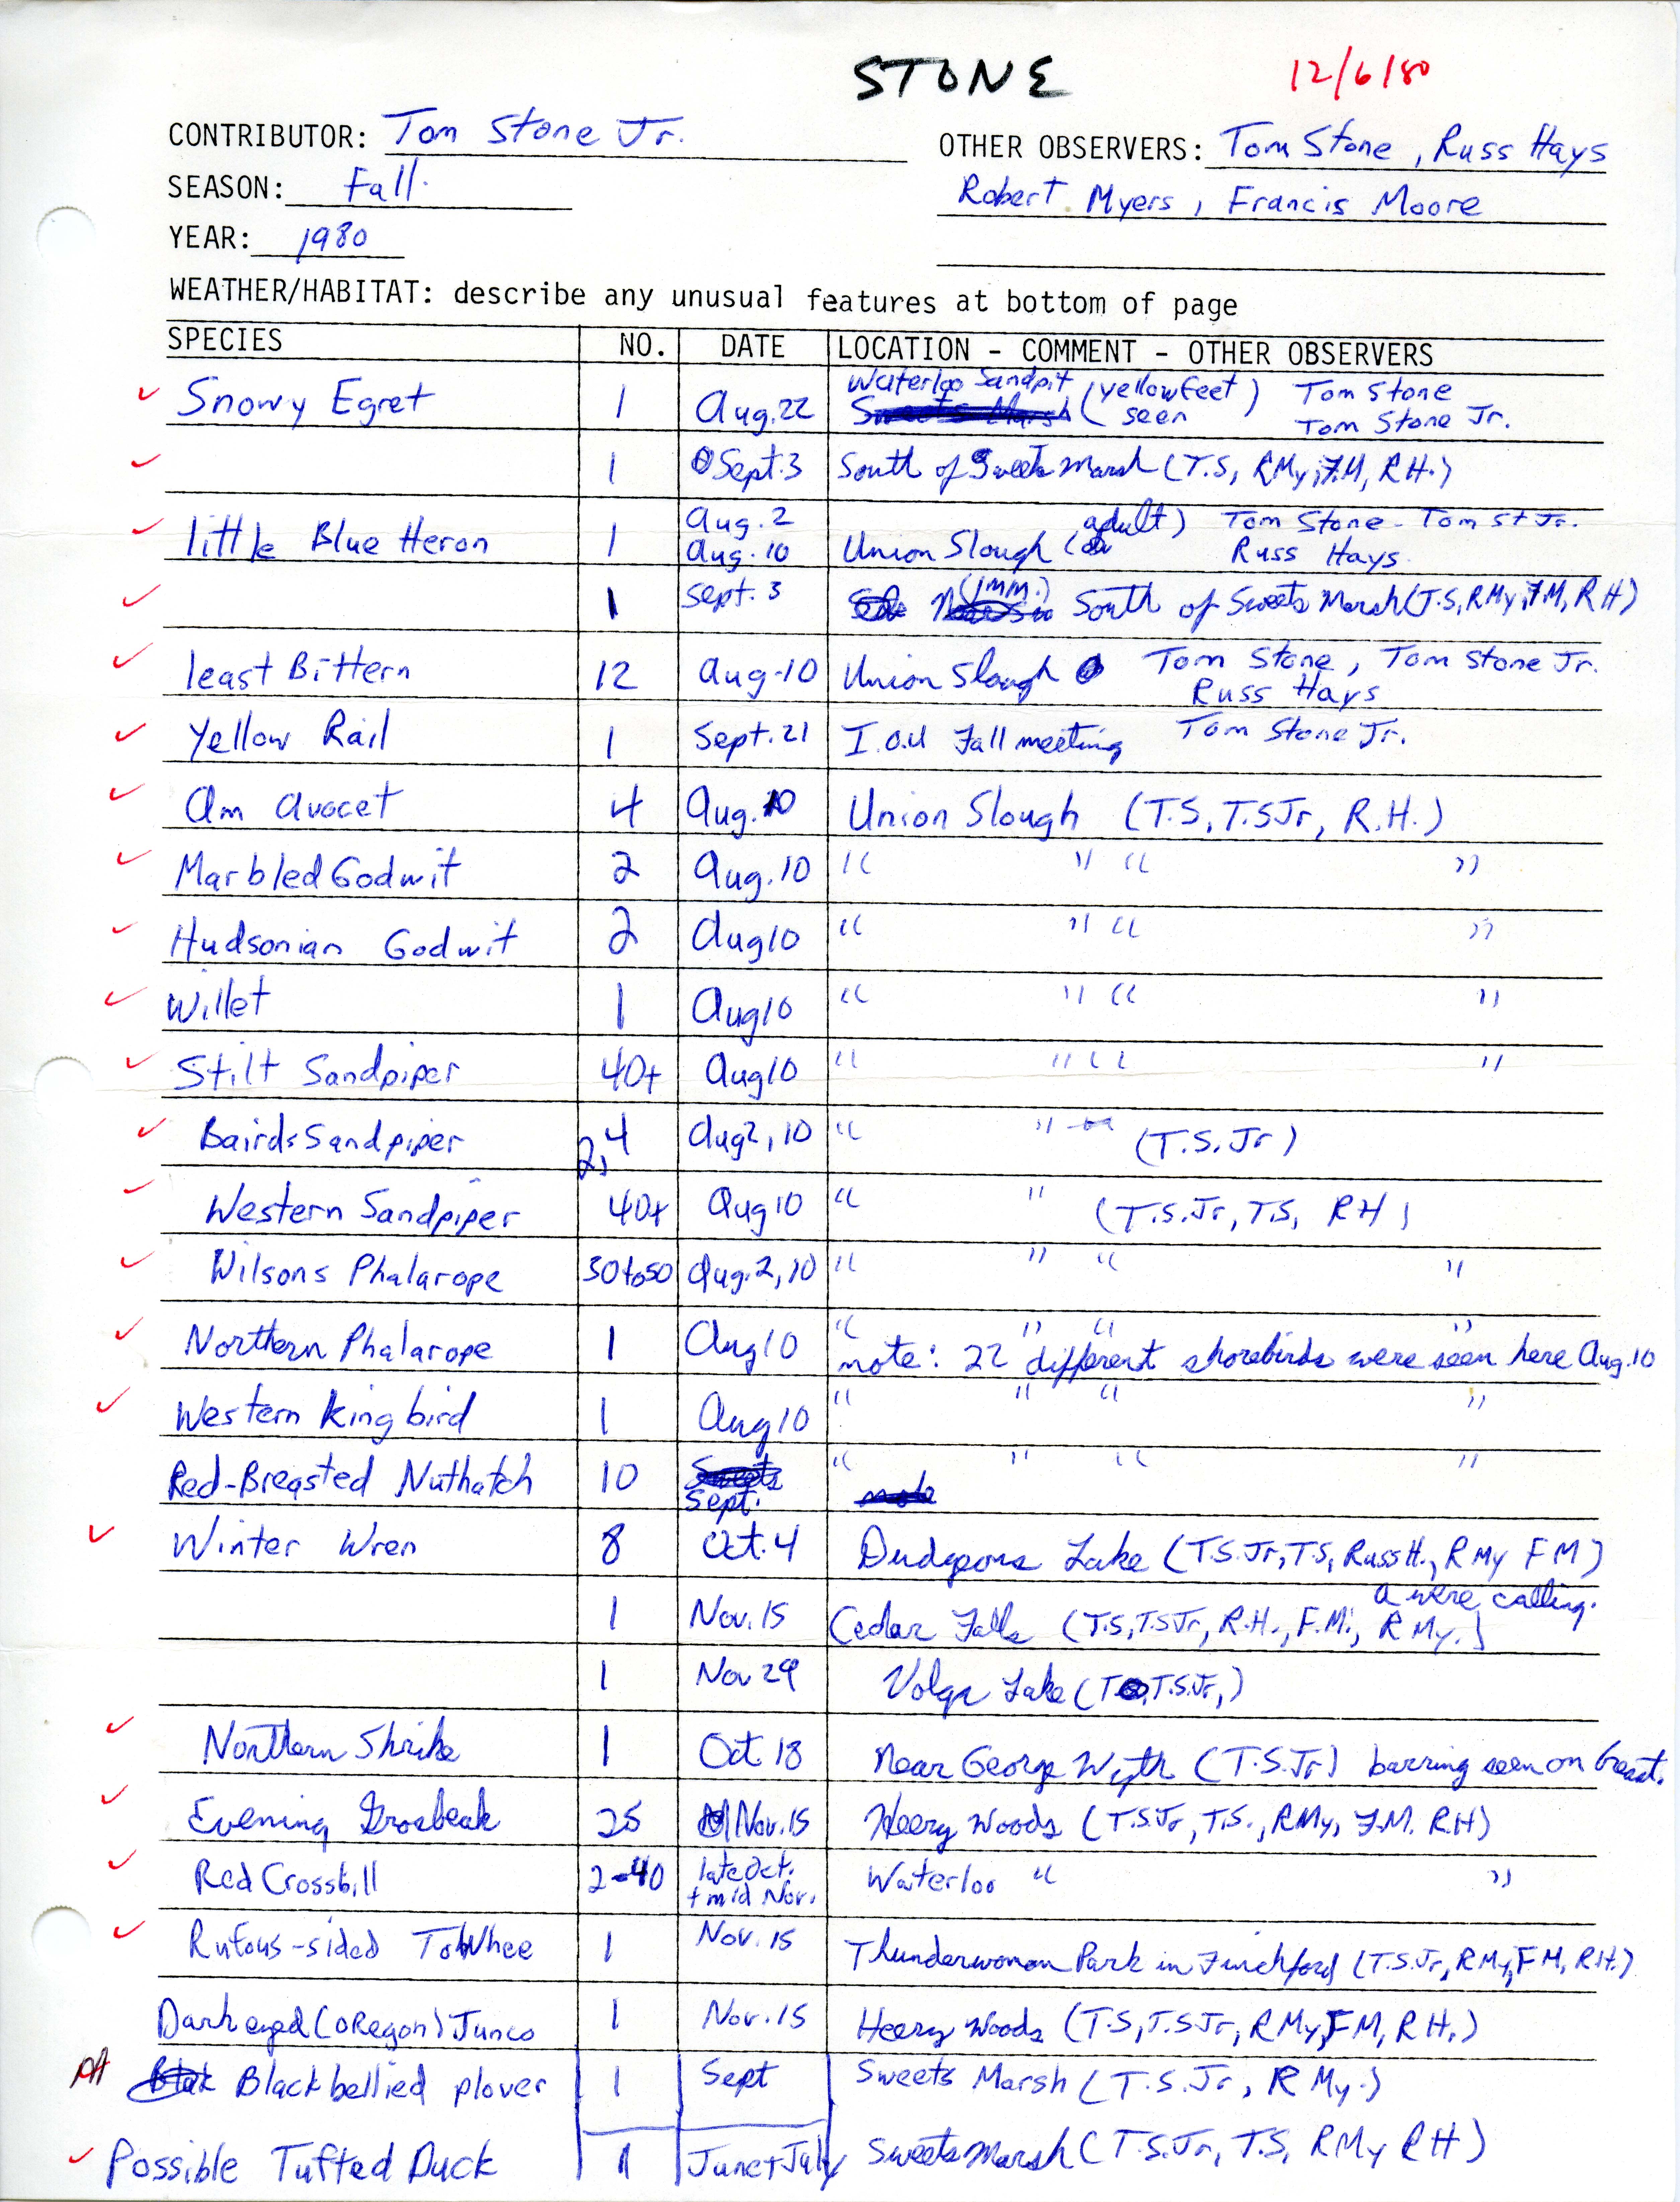 Annotated bird sighting list for Fall 1980 compiled by Tom Stone, Jr.